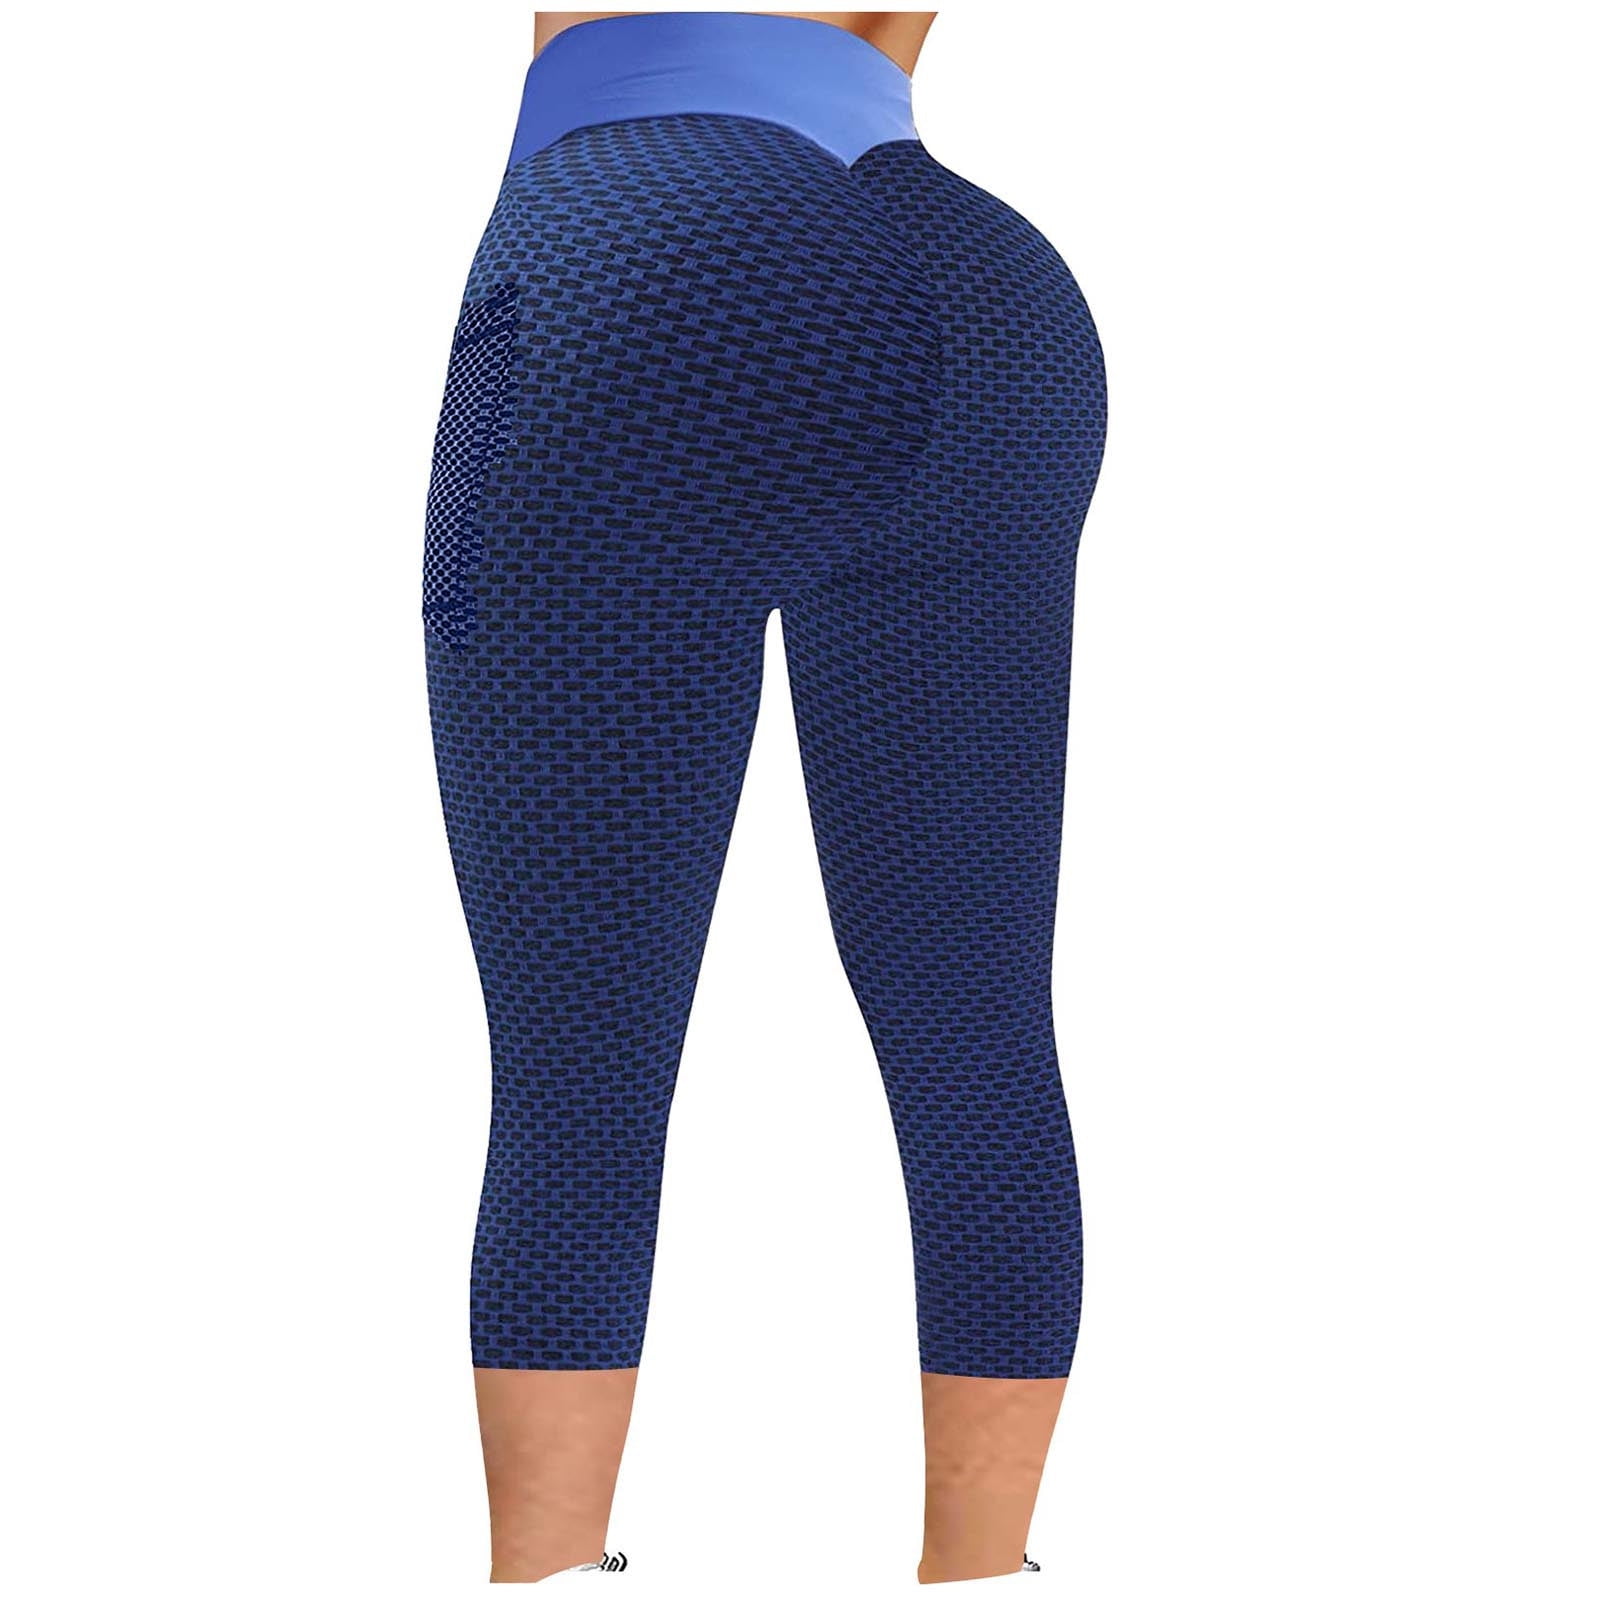 How to Choose Leggings to Hide Cellulite? (#3 Tip is the Most